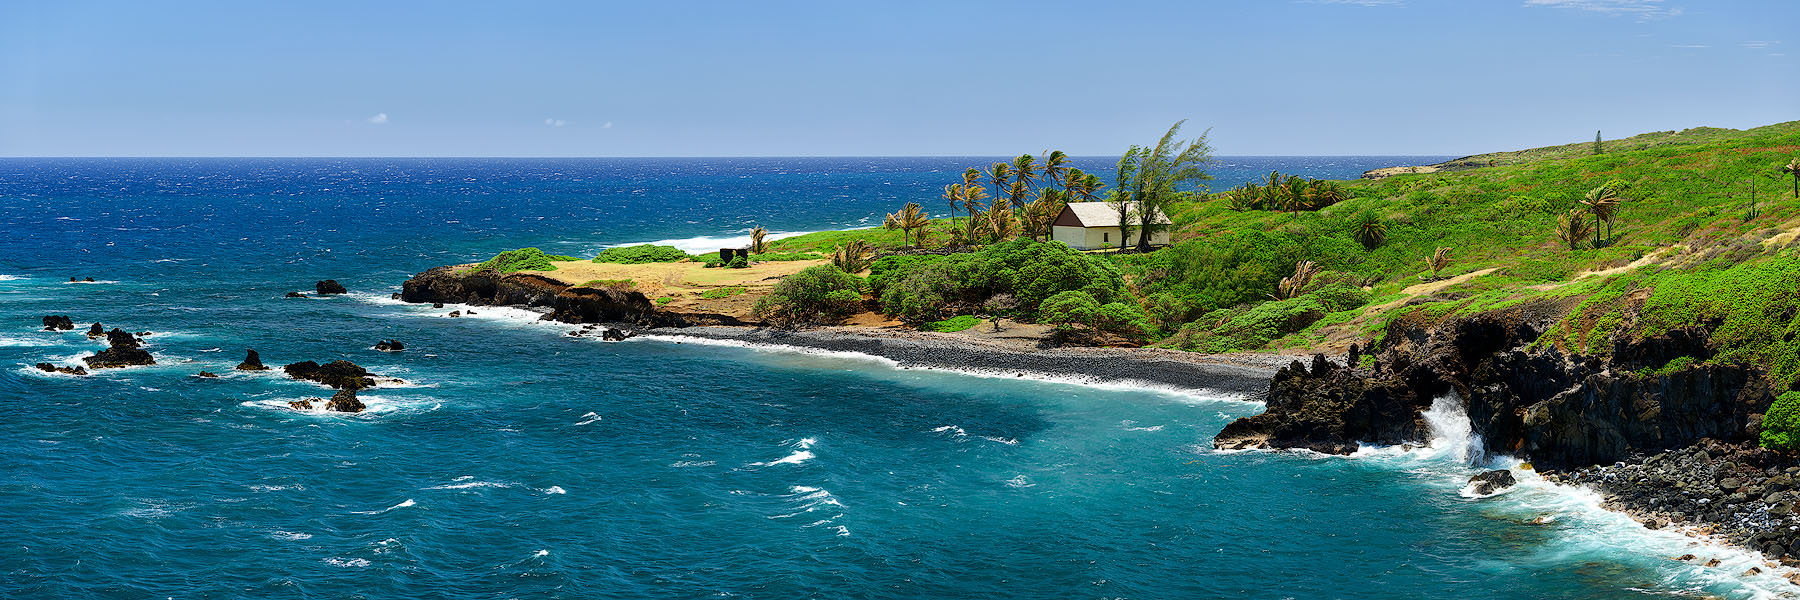 the Huialoha church on the island of Maui during a perfect clear day along the road to Hana.  Panorama photography by photographer Andrew Shoemaker